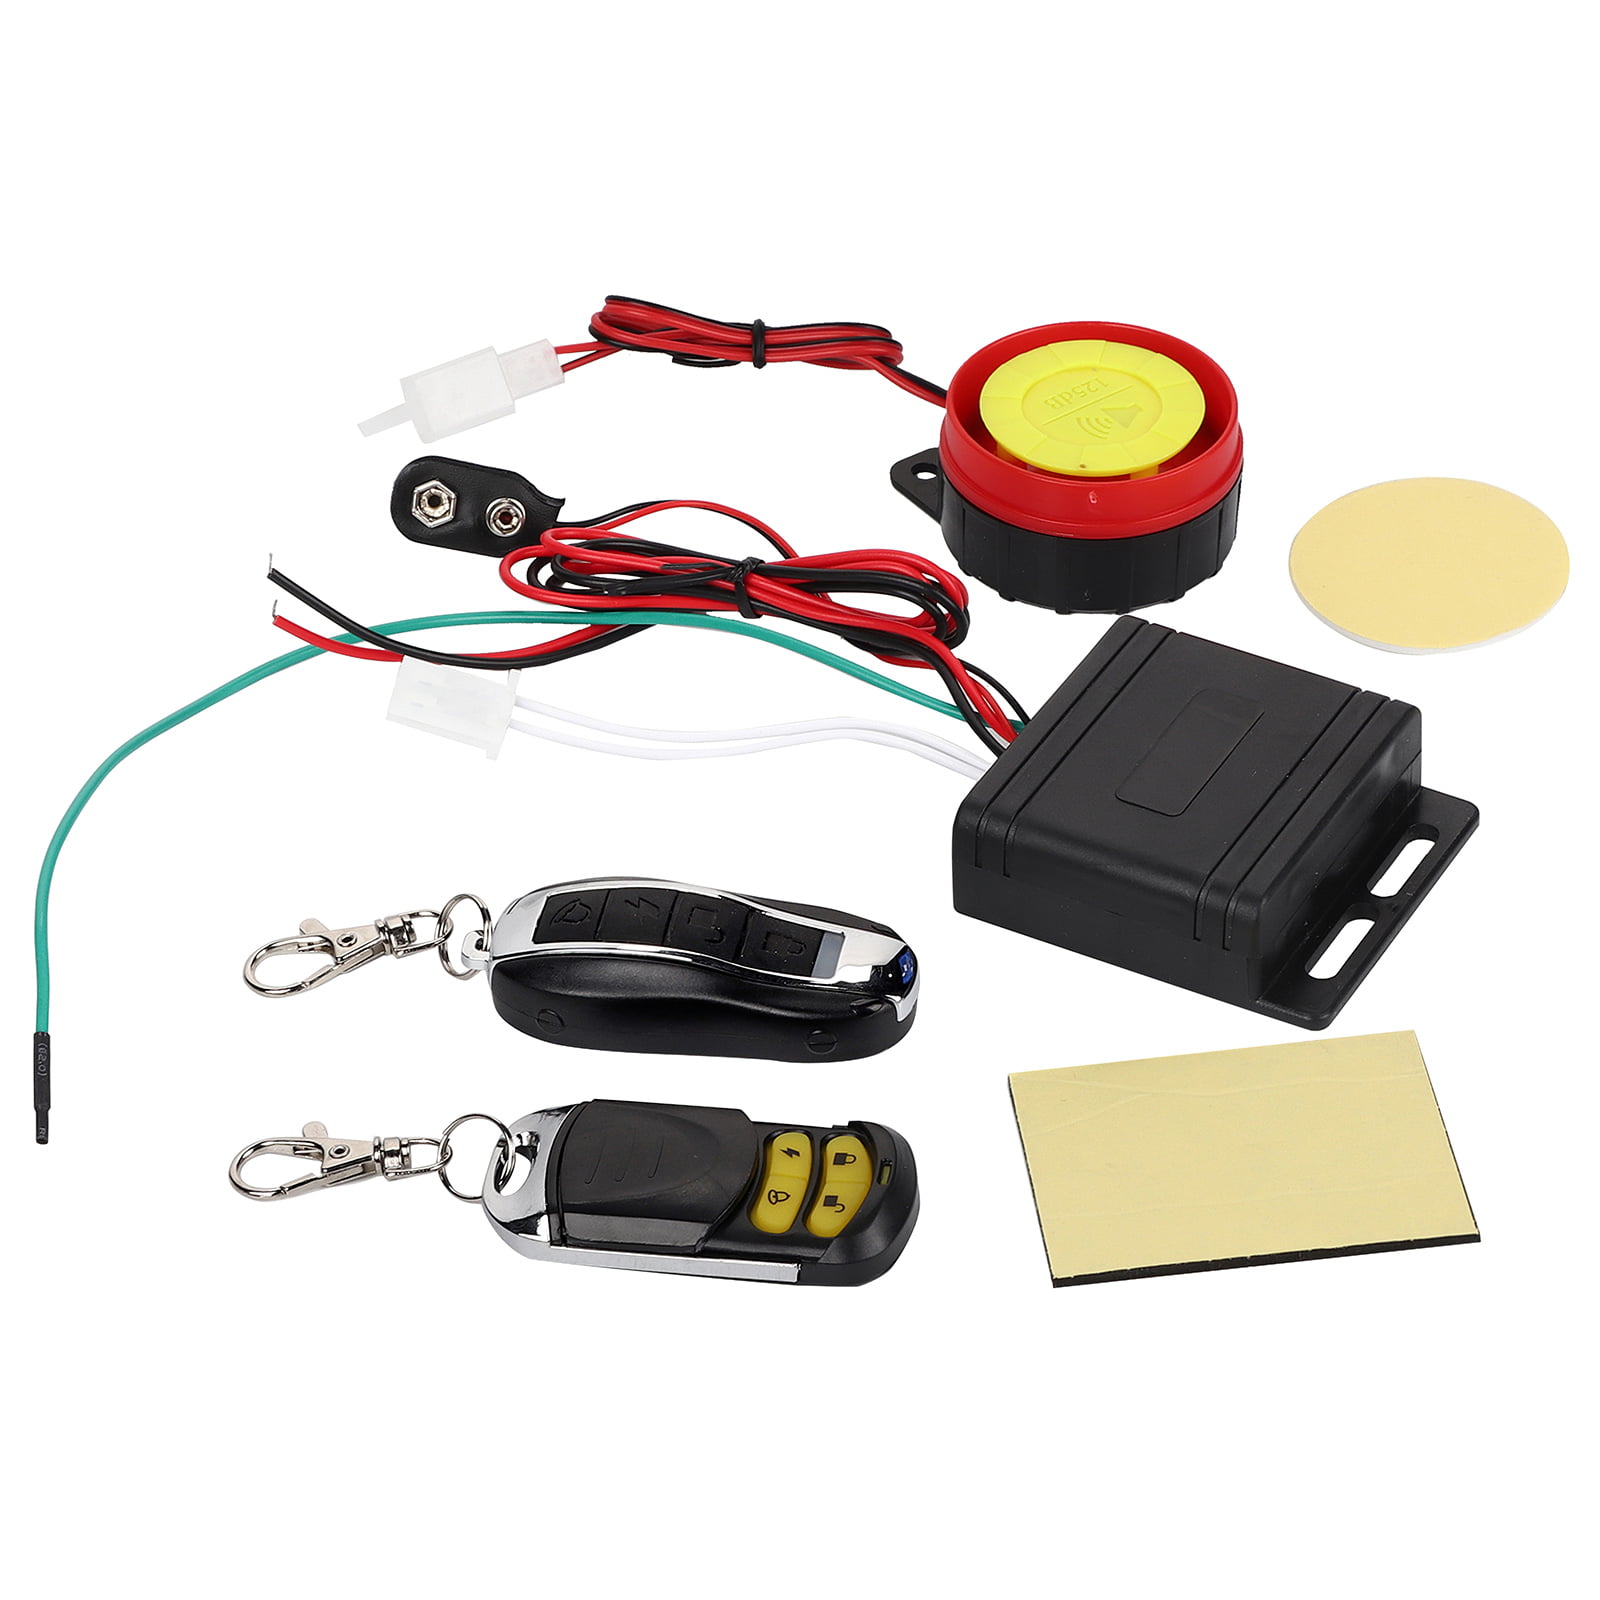 Anti-Theft Vibration Motorcycle Bike Security Alarm System Remote Control 12V 